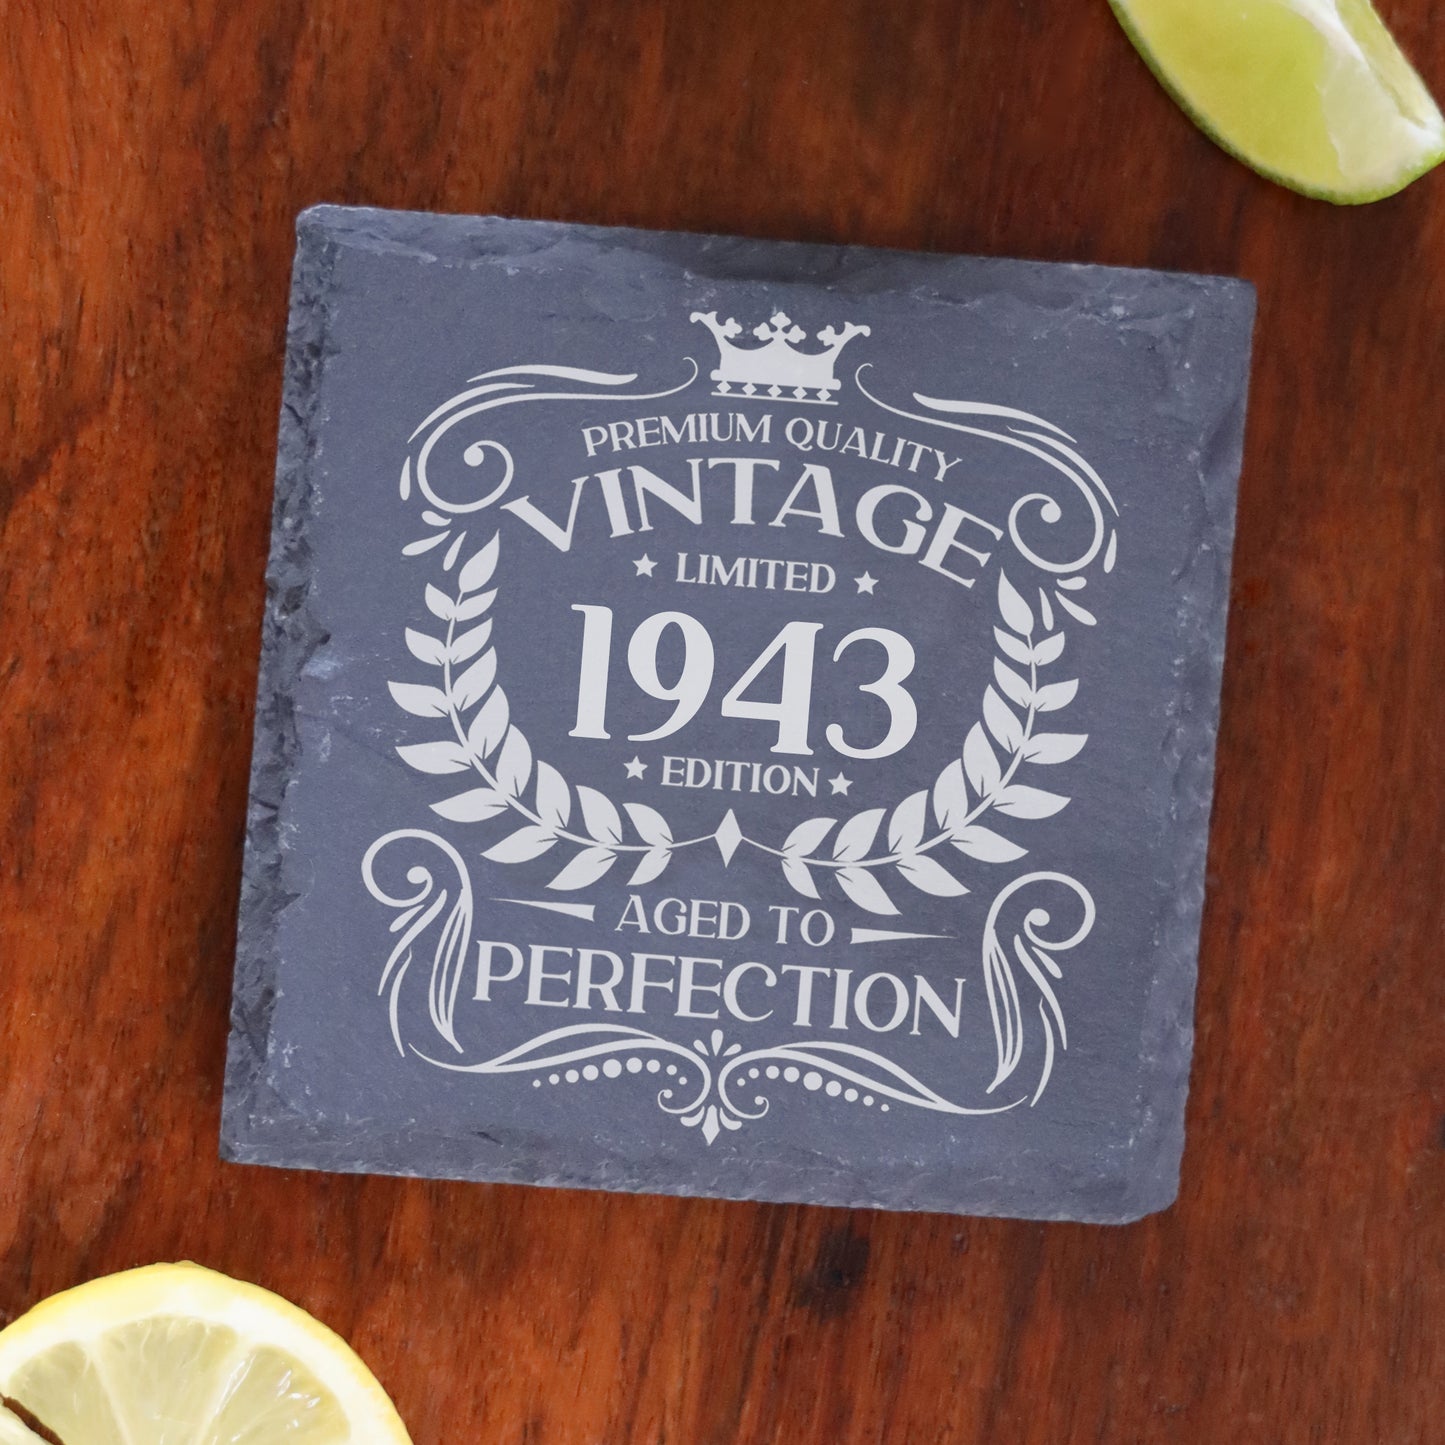 Vintage 1943 80th Birthday Engraved Wine Glass Gift  - Always Looking Good - Square Coaster Only  